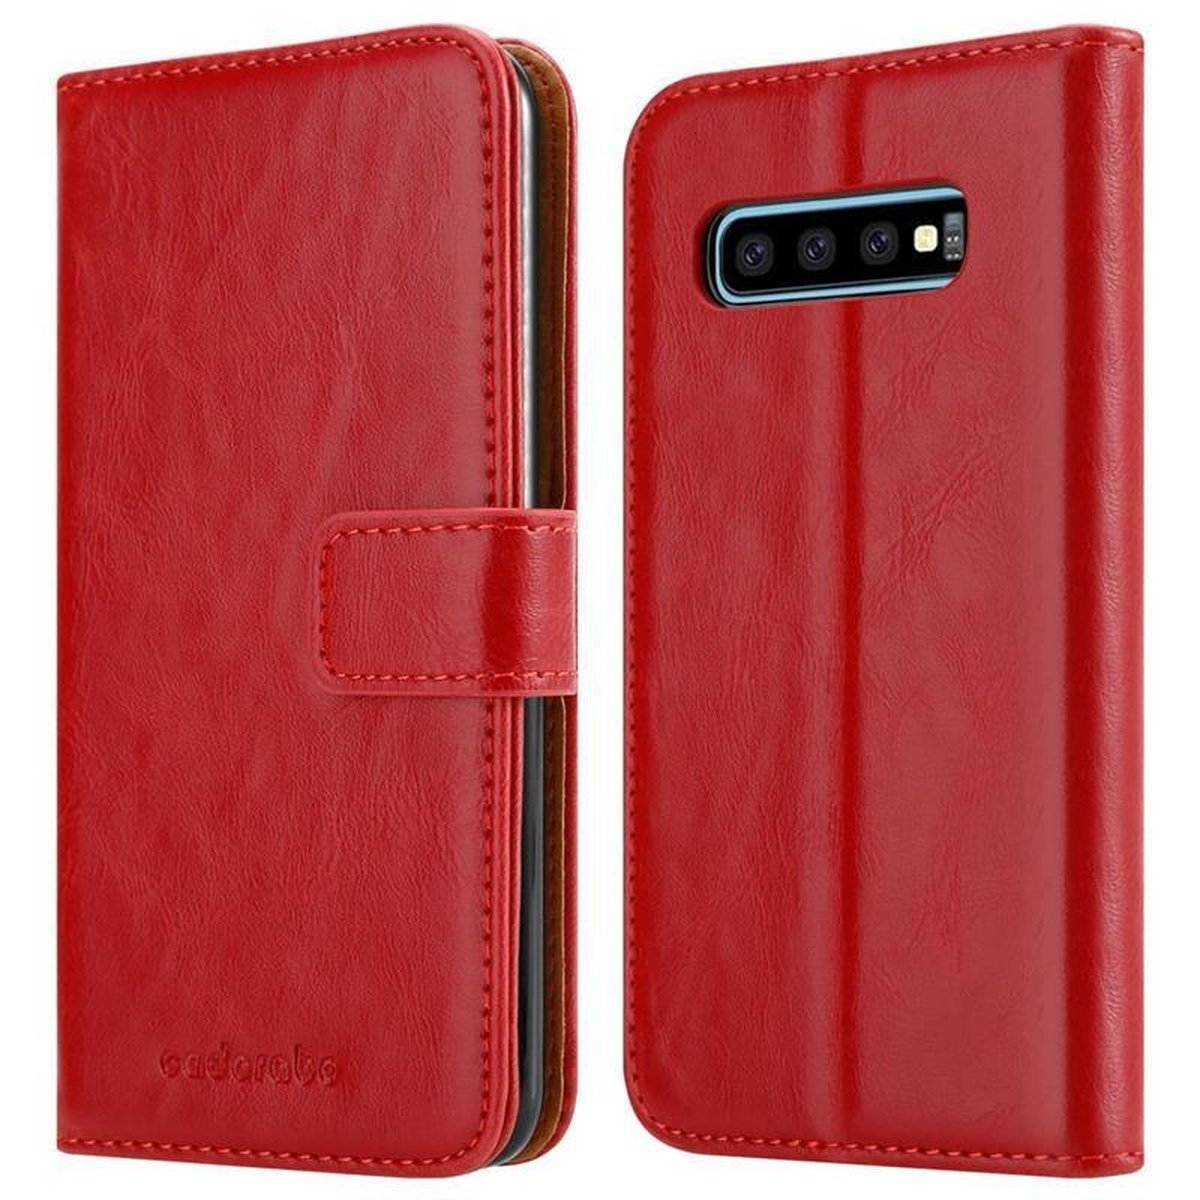 S10 ROT WEIN PLUS, Galaxy Samsung, Bookcover, Style, CADORABO Book Luxury Hülle